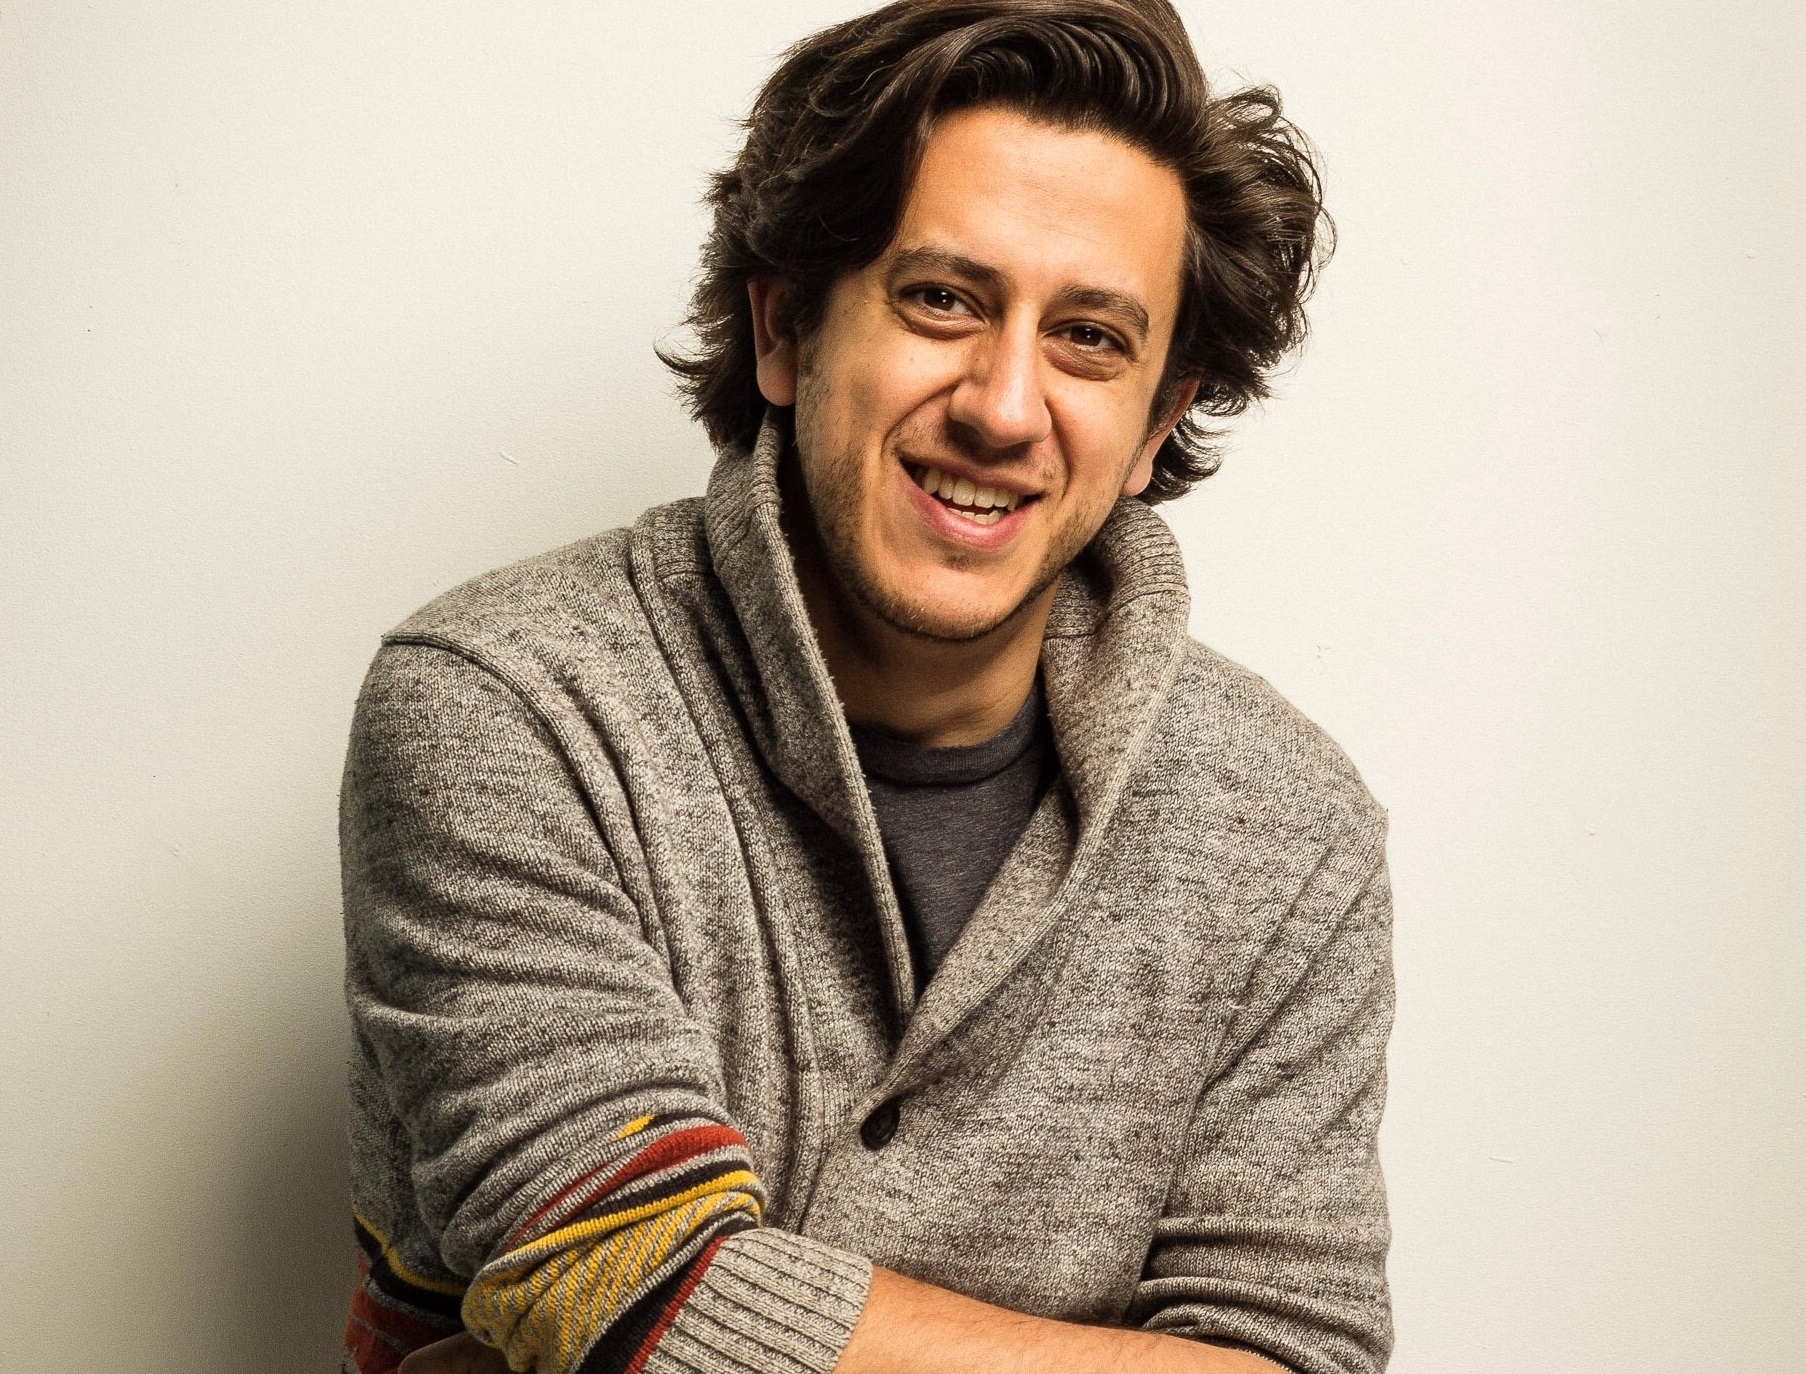 Kris Siddiqi wearing a finely knit sweater, smiling effortlessly at the camera